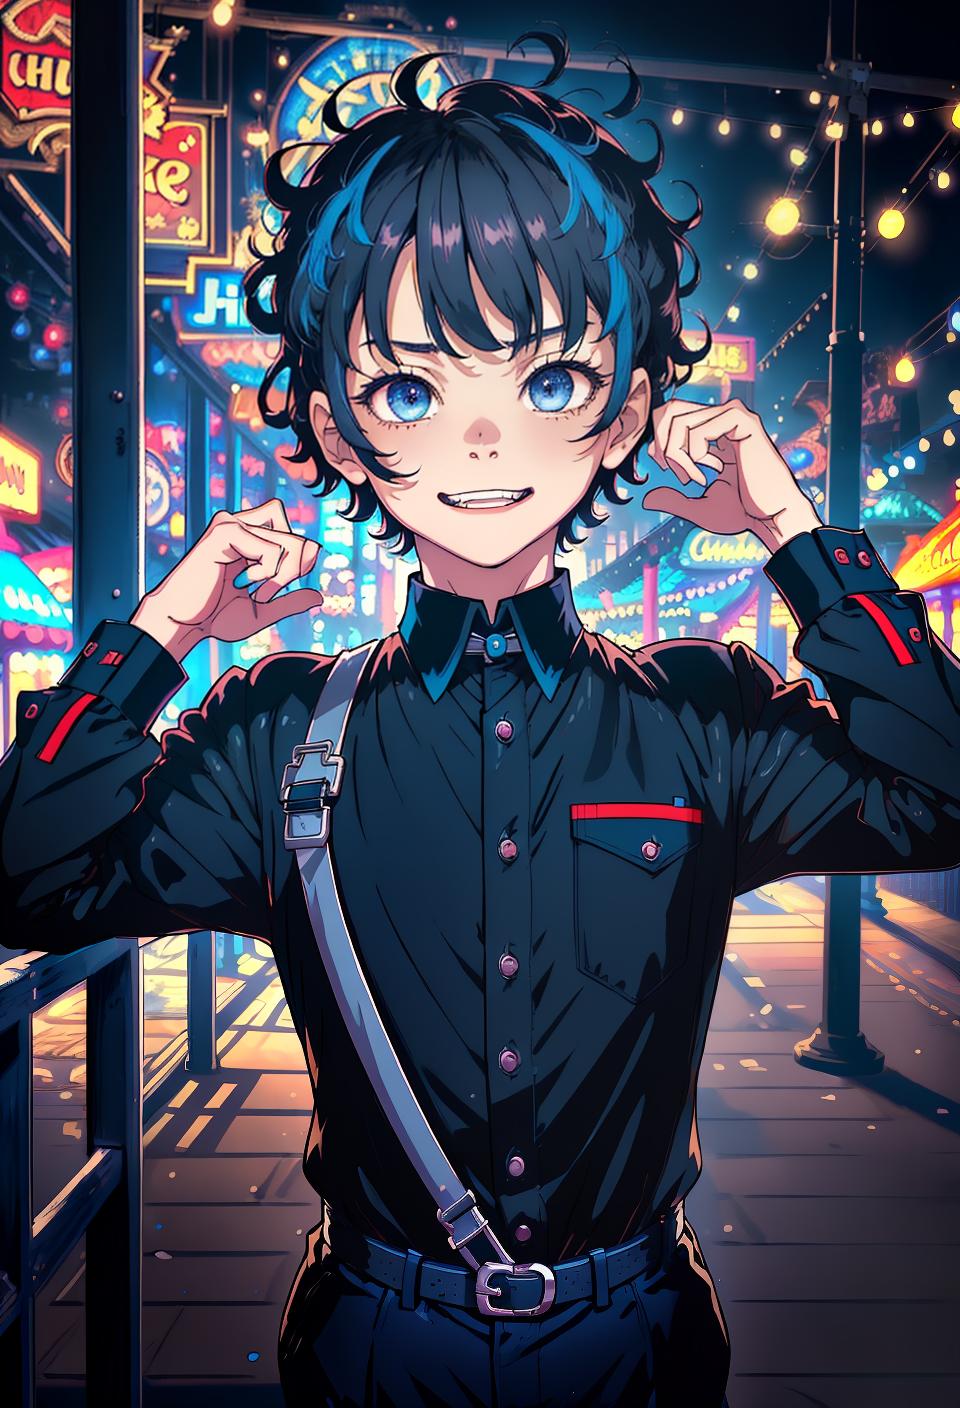  ((trending, highres, masterpiece, cinematic shot)), 1boy, chibi, male goth clothing, amusement park scene, very short curly grey hair, side-swept bangs, narrow blue eyes, barbaric personality, happy expression, fair skin, orderly, limber